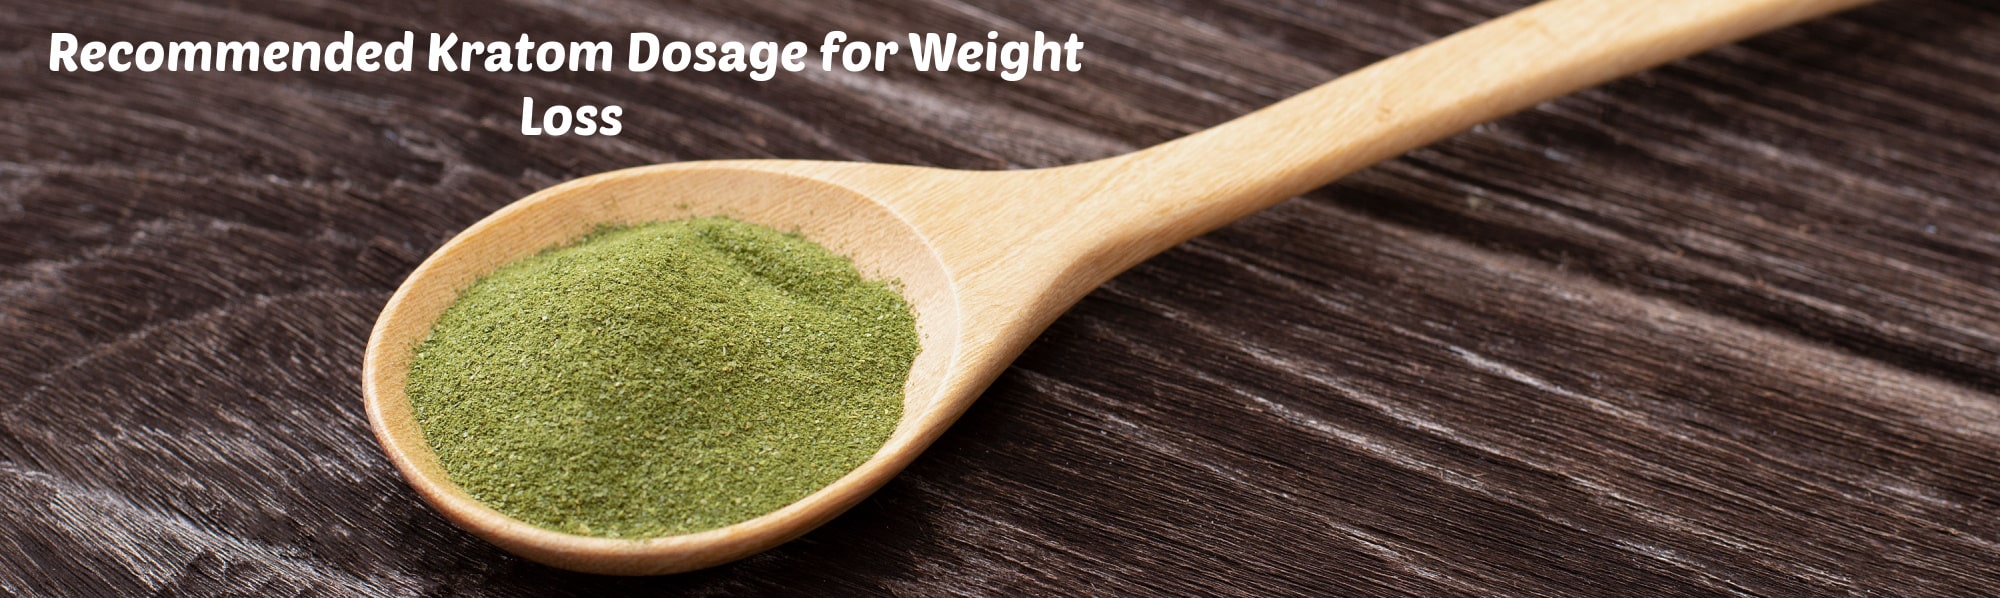 image of recommended dosage of kratom for weight loss